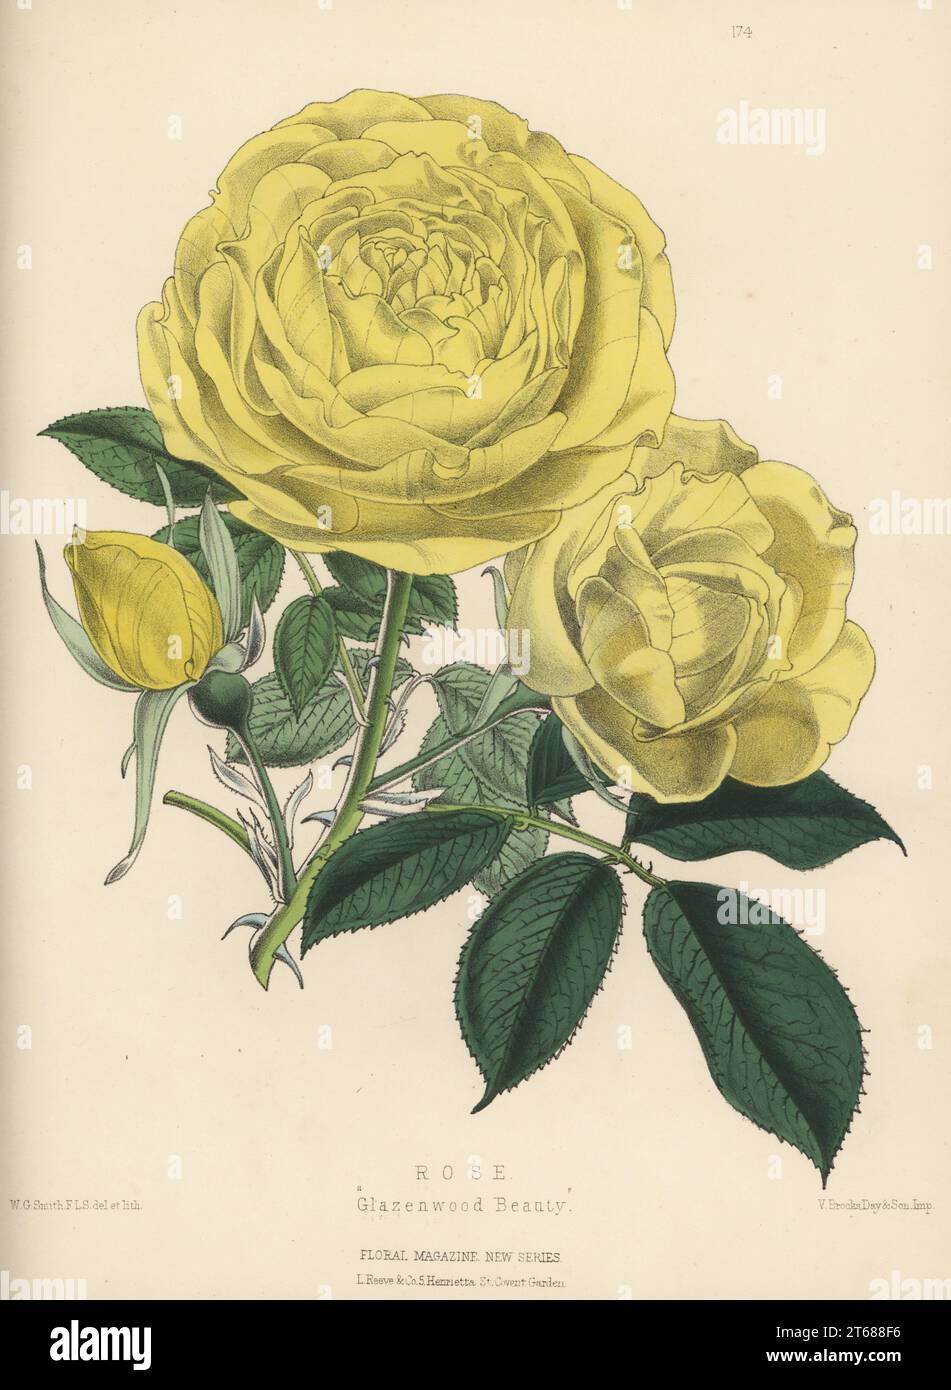 Yellow hybrid rose, Glazenwood Beauty. Japanese briar rose raised by Lewis Woodthorpe at Glazenwood Nursery, Essex. Handcolored botanical illustration drawn and lithographed by Worthington George Smith from Henry Honywood Dombrain's Floral Magazine, New Series, Volume 4, L. Reeve, London, 1875. Lithograph printed by Vincent Brooks, Day & Son. Stock Photo